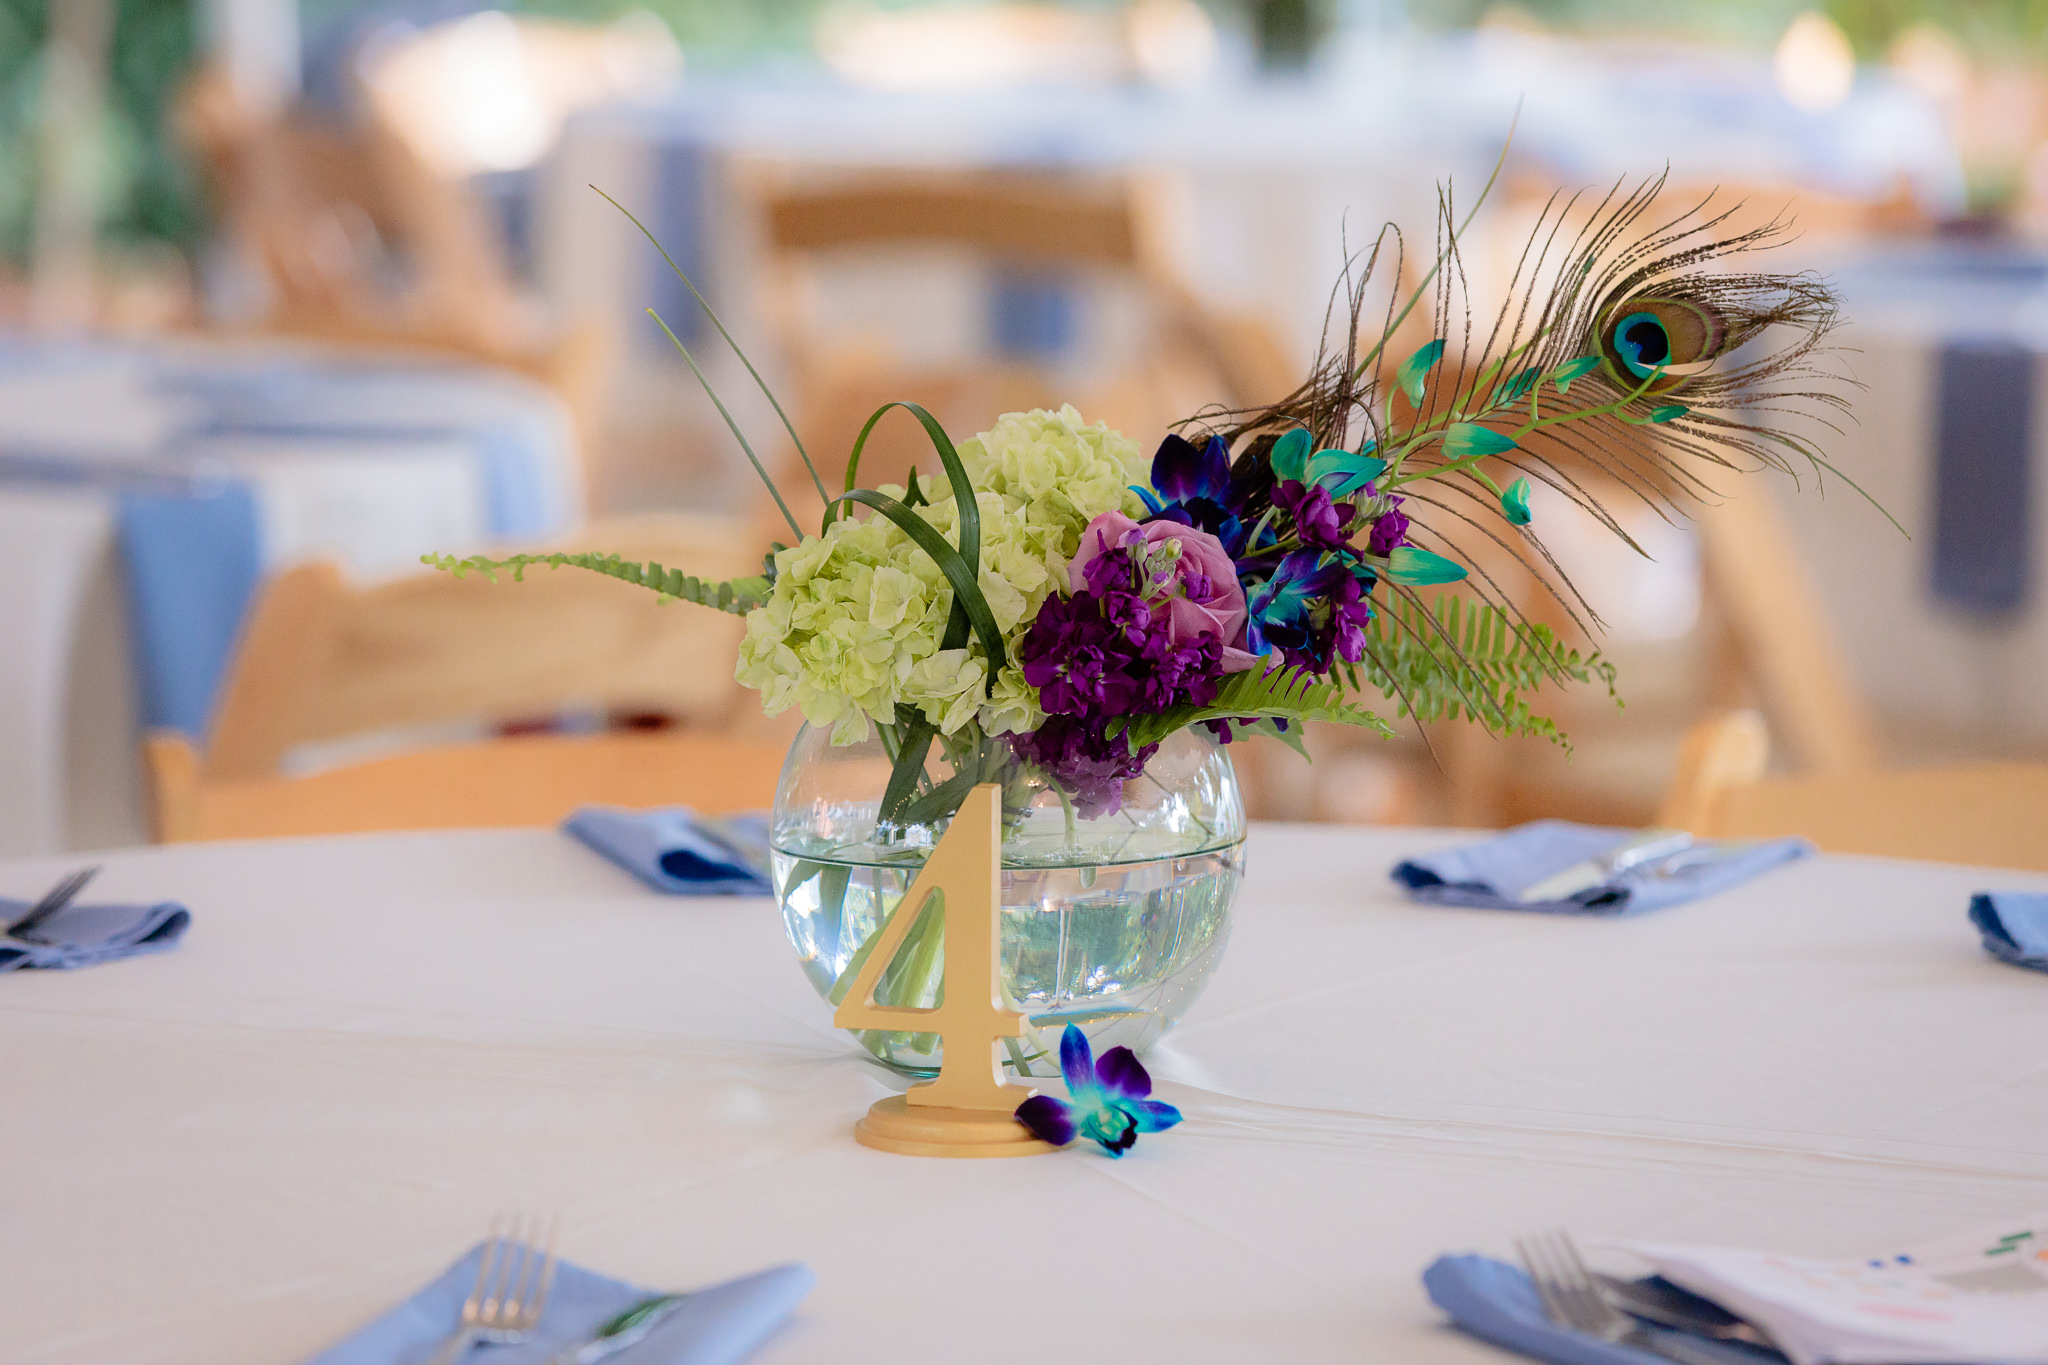 Floral & peacock centerpieces by One Happy Flower Shop at a National Aviary wedding